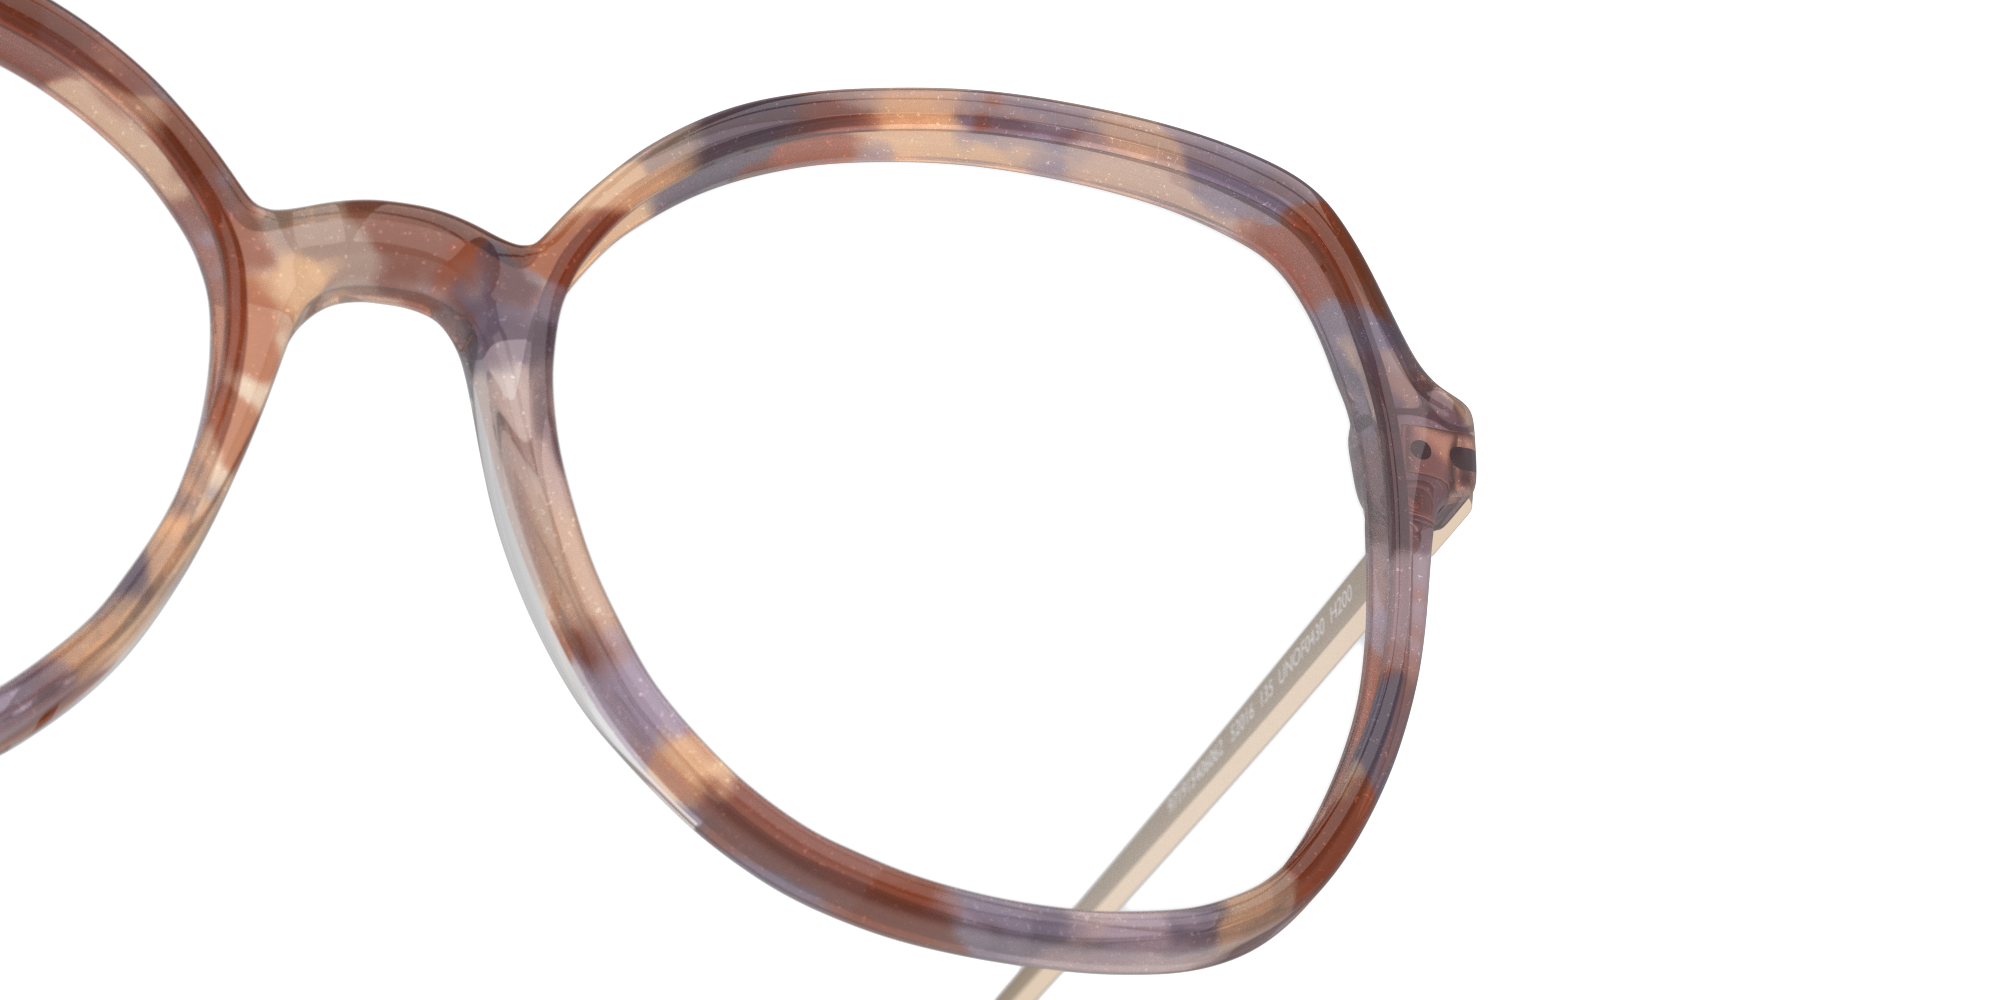 Detail01 Unofficial UNOF0430 (VD00) Glasses Transparent / Brown